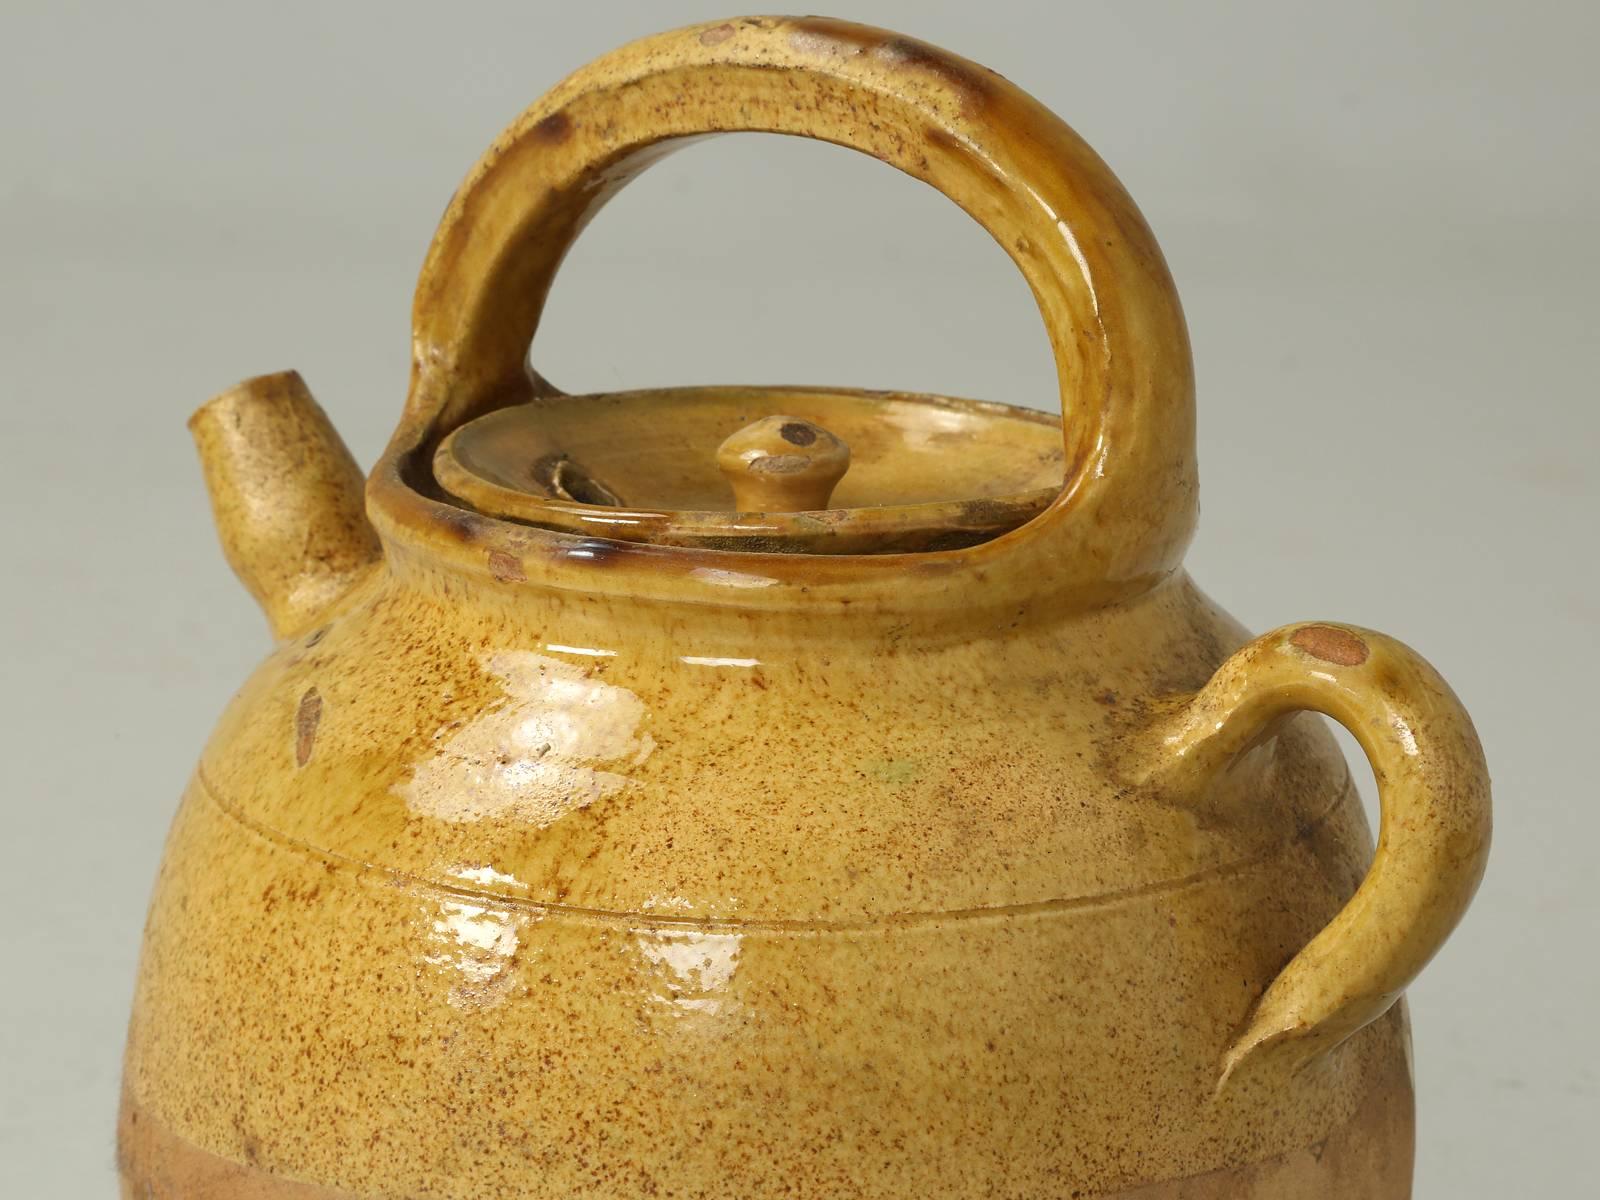 Glazed Antique French Authentic Ceramic Water Pitcher, or 'Cruche' with Handle and Lid For Sale